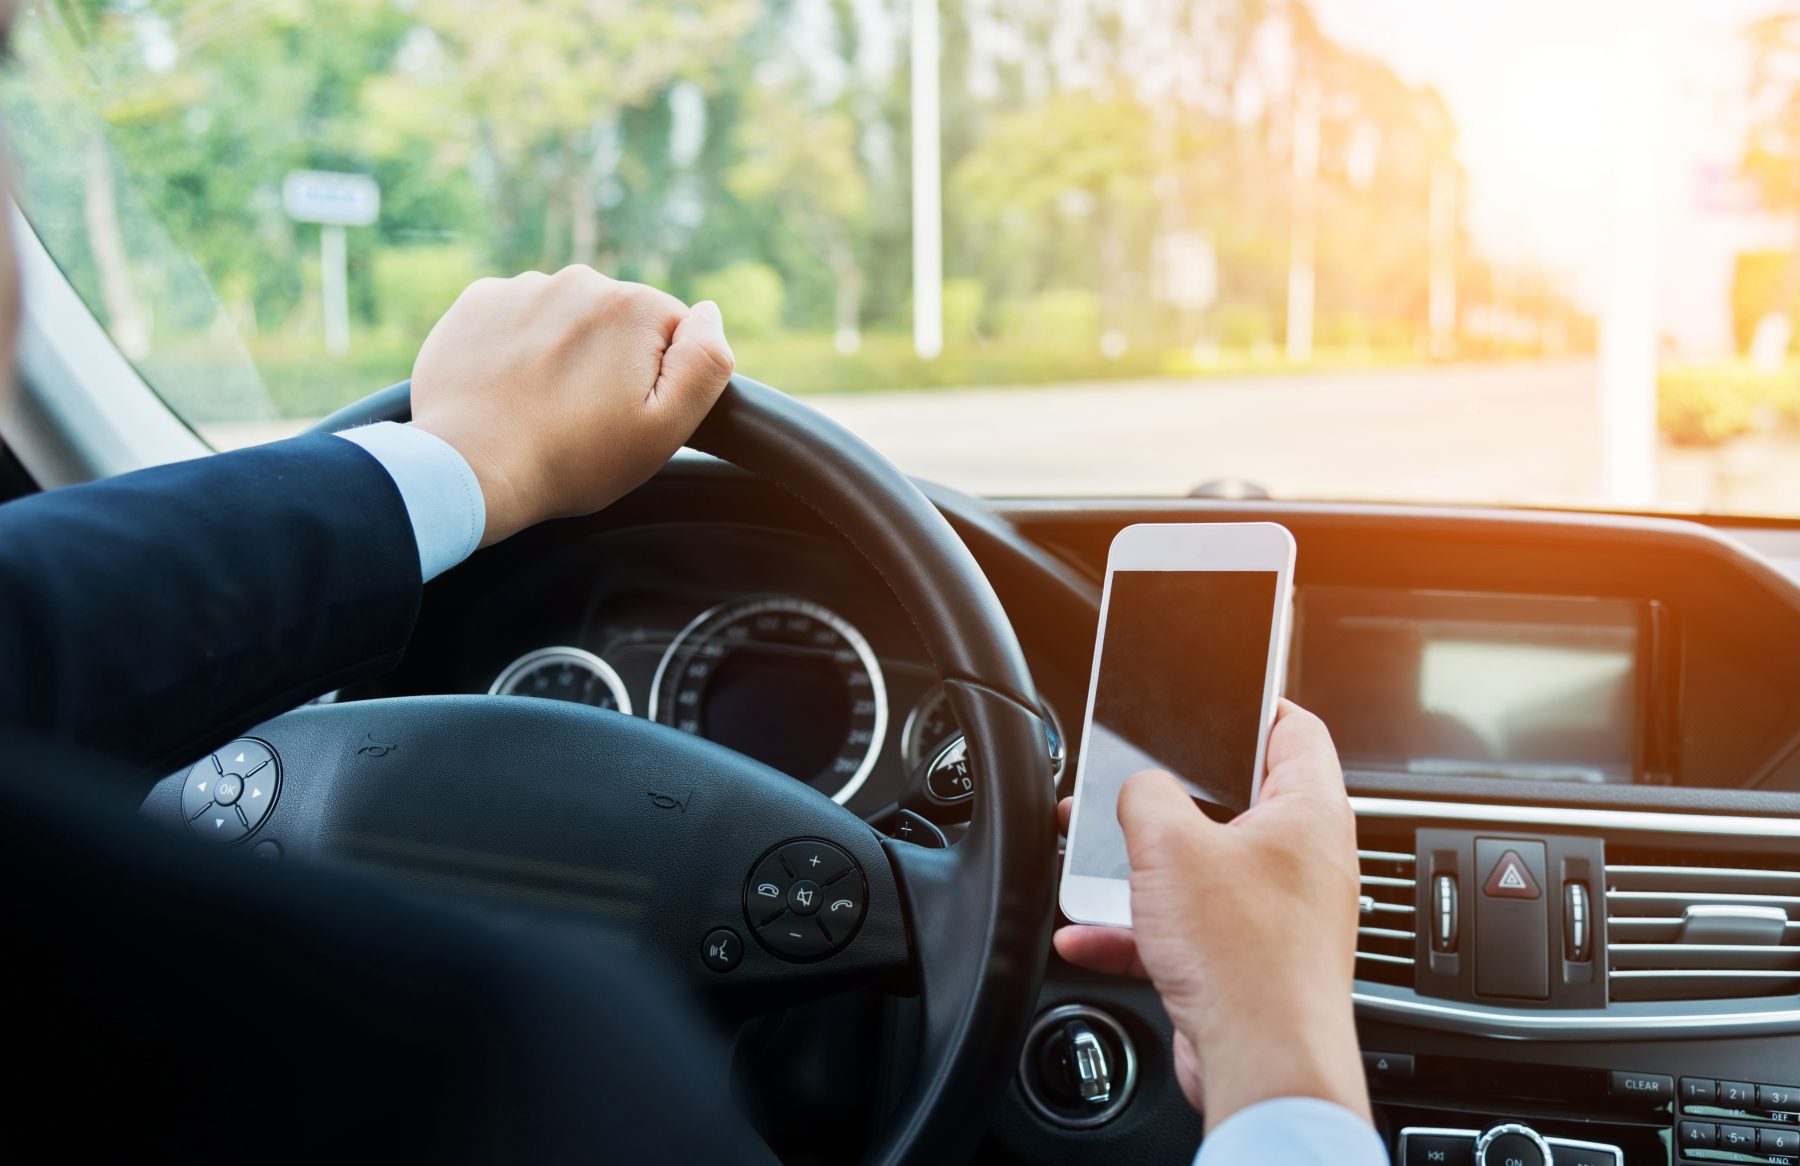 5 Worst Texting and Driving Accidents